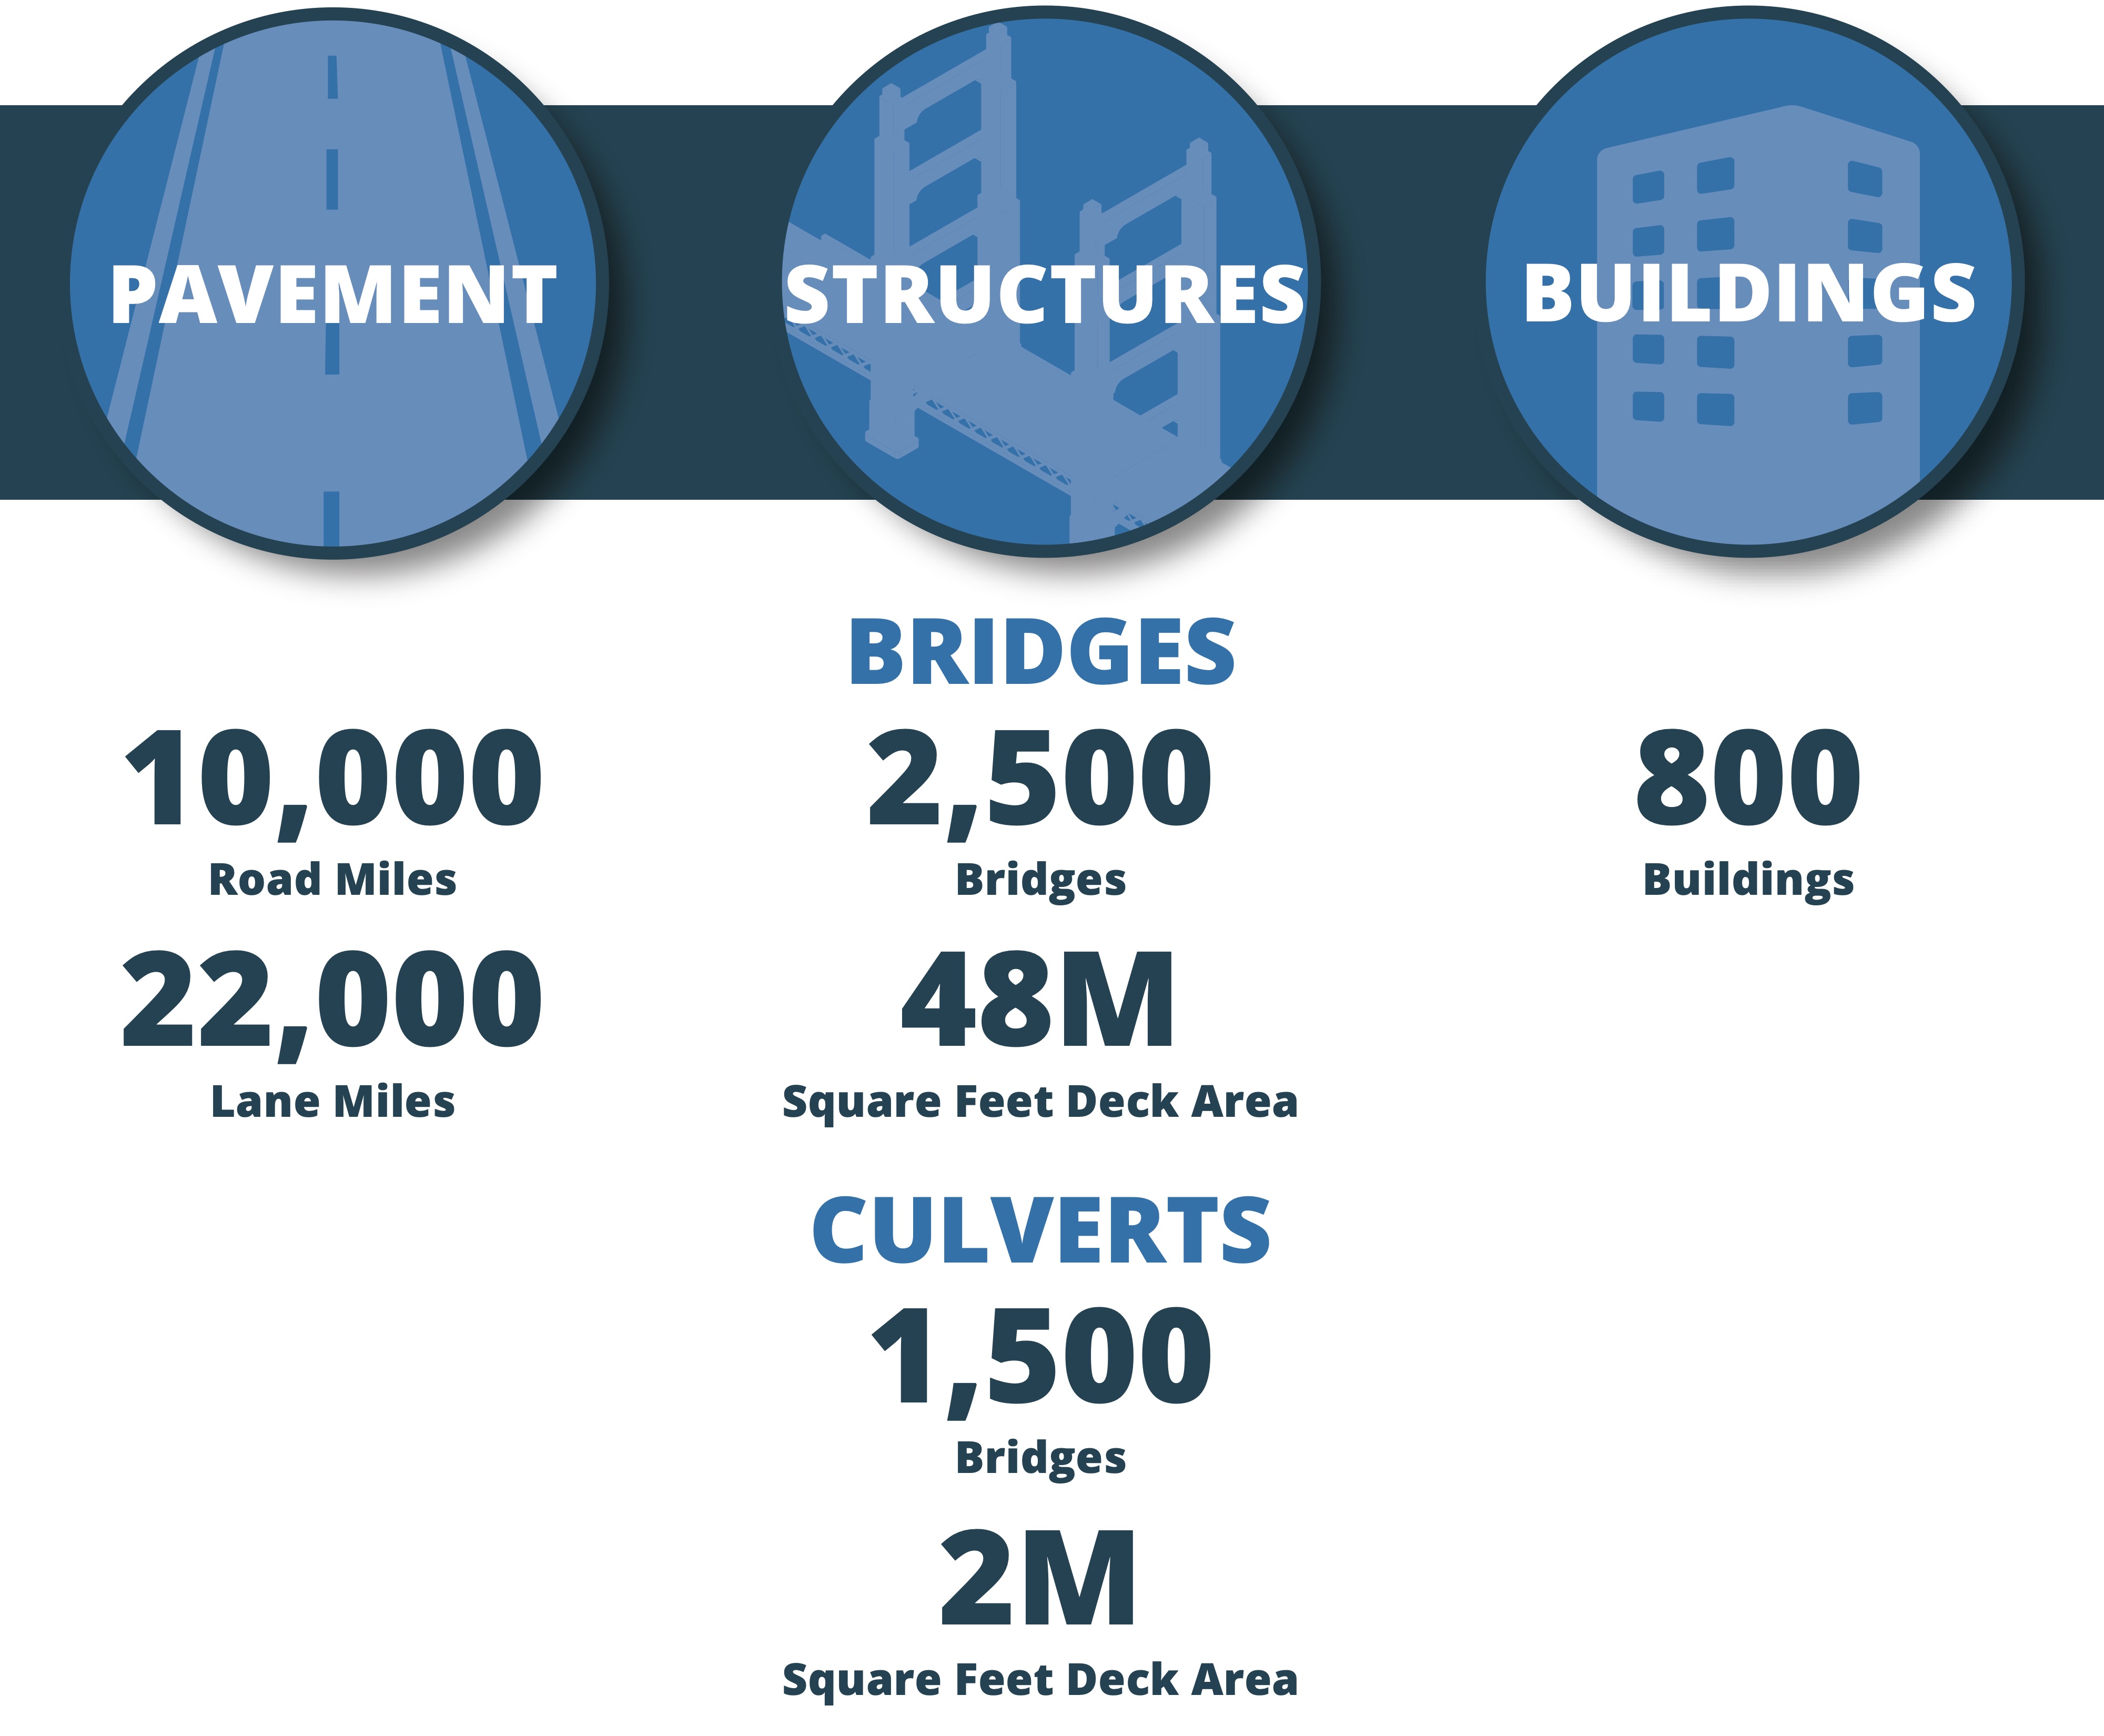 summary of pavement, structure, and building assets for the northern agency